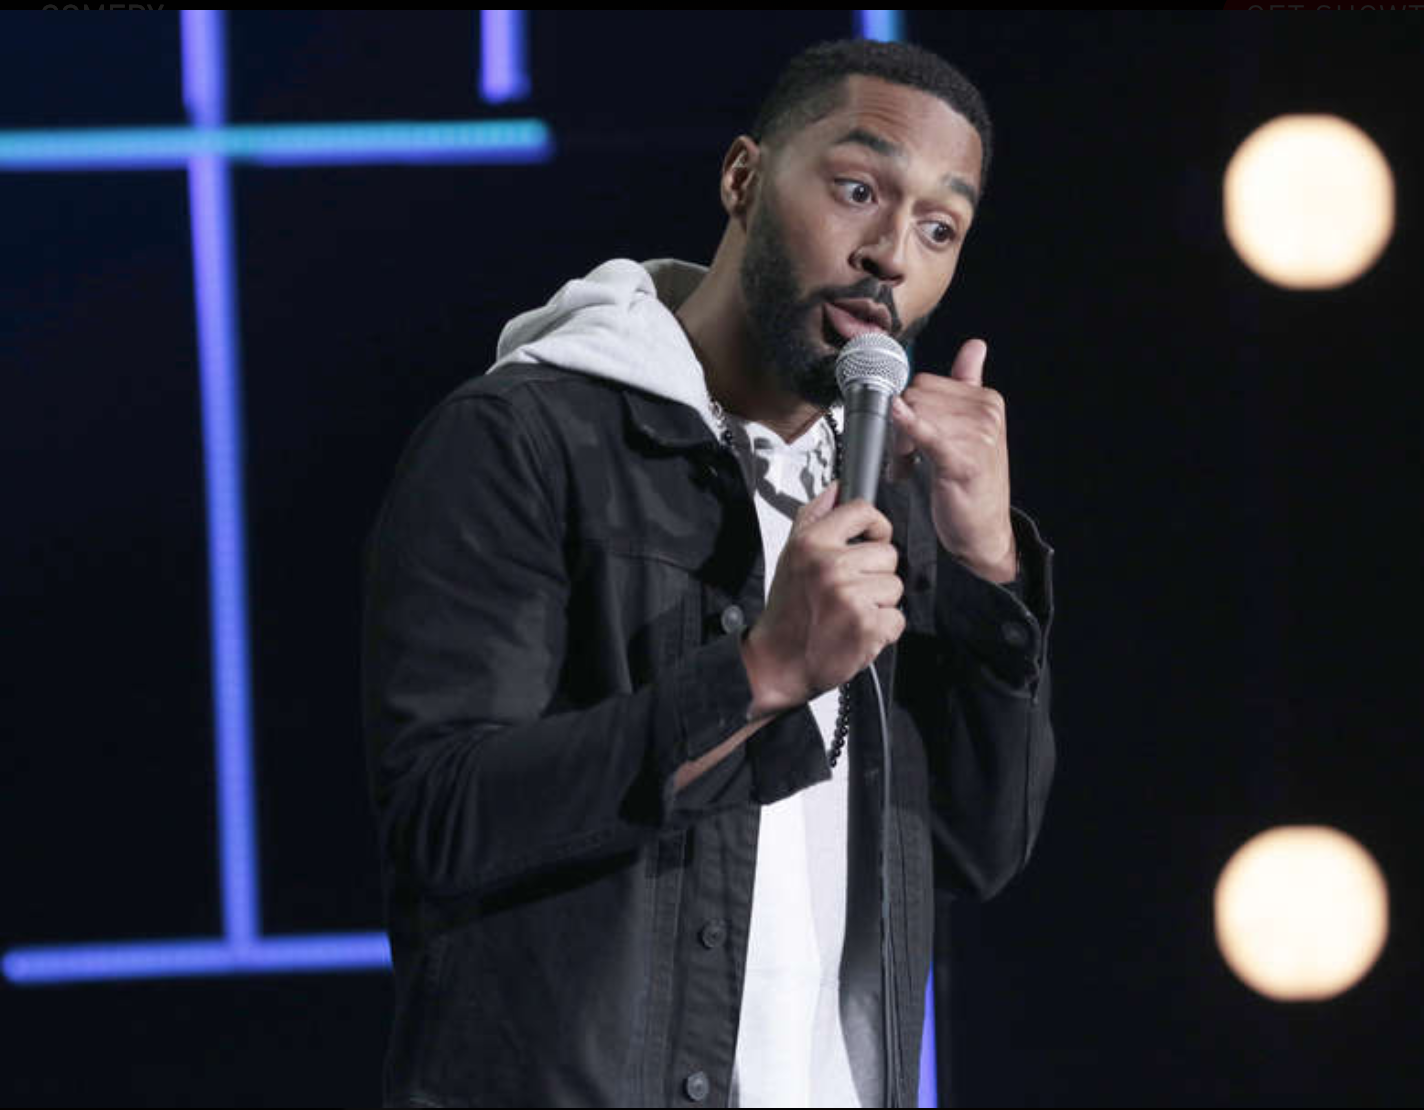 Review: Tone Bell, “Can’t Cancel This” on Showtime